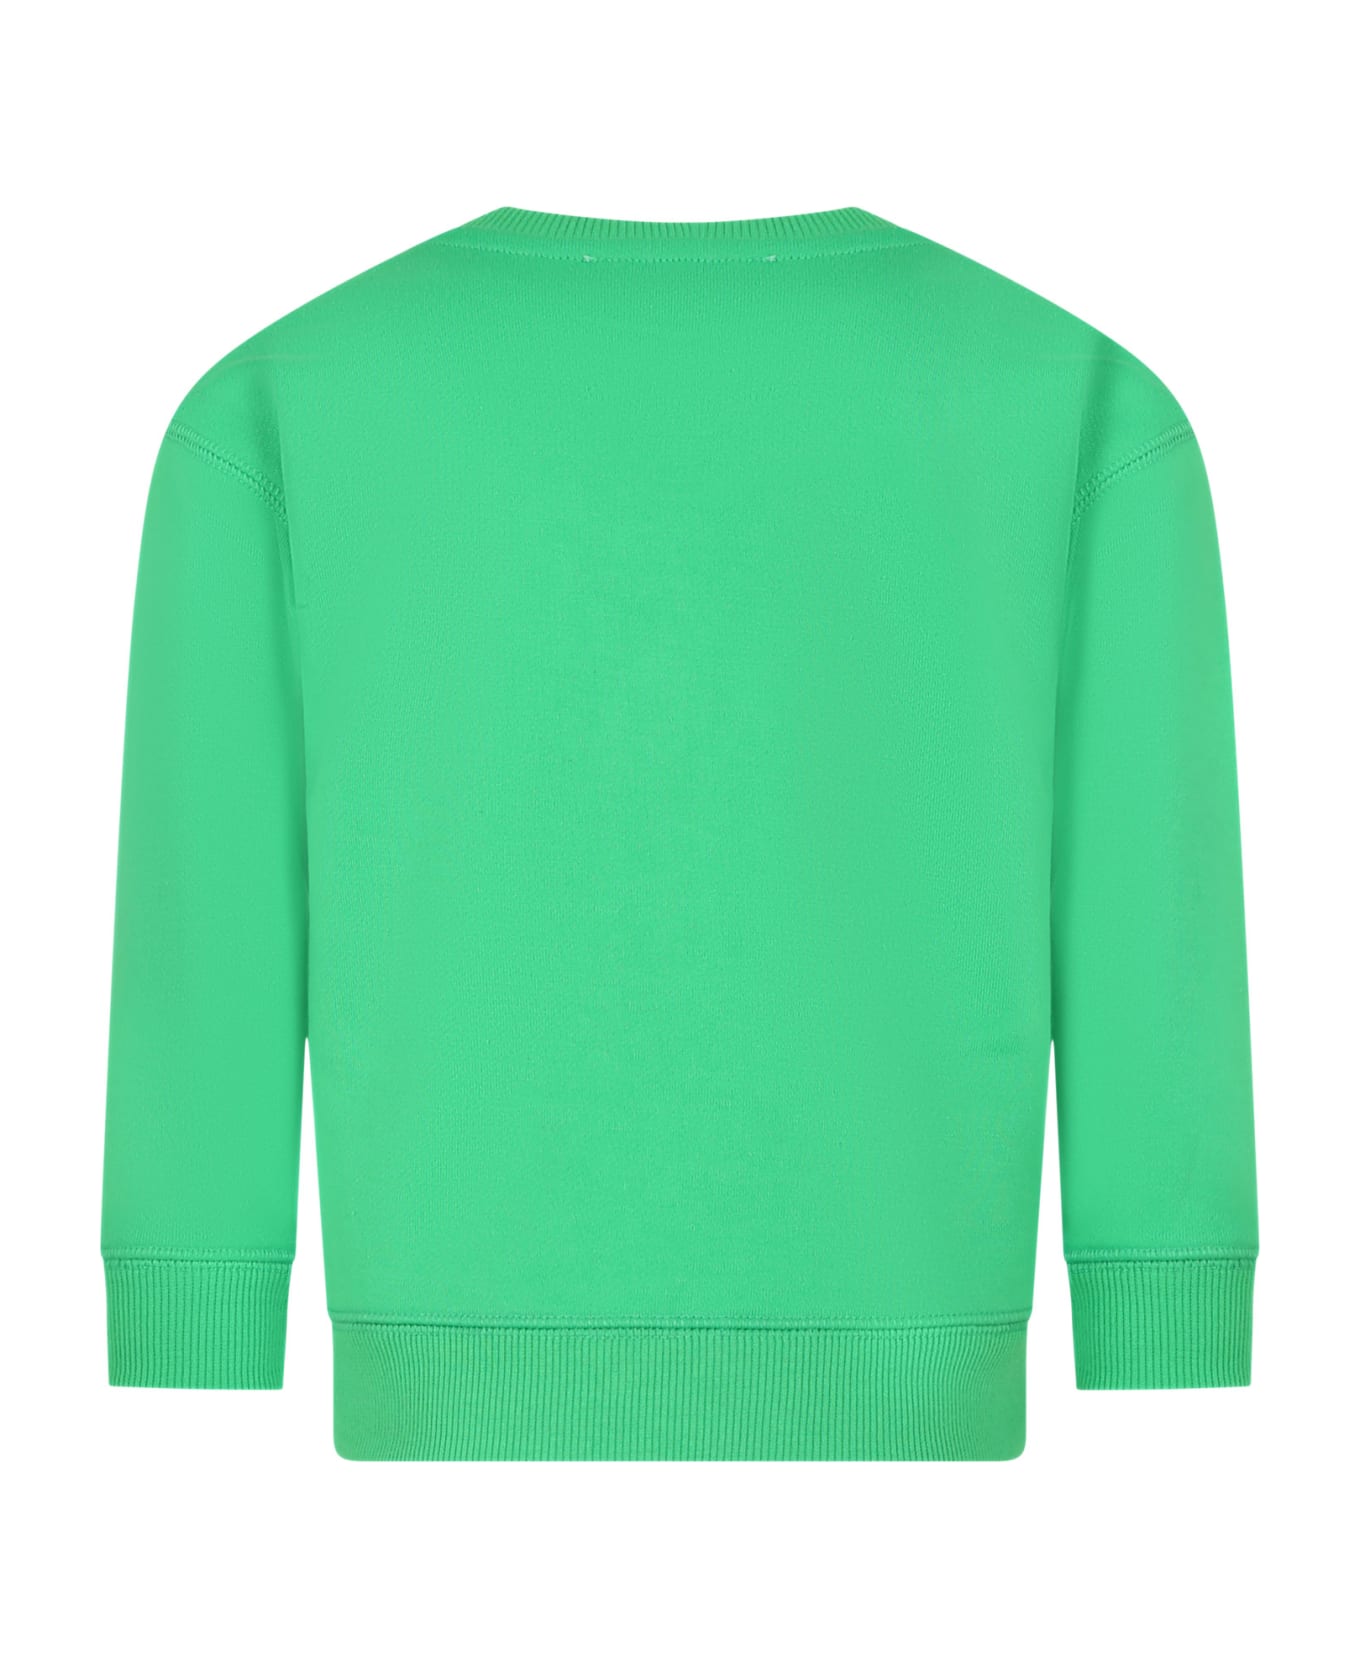 Marc Jacobs Green Sweatshirt For Kids With Logo - Green